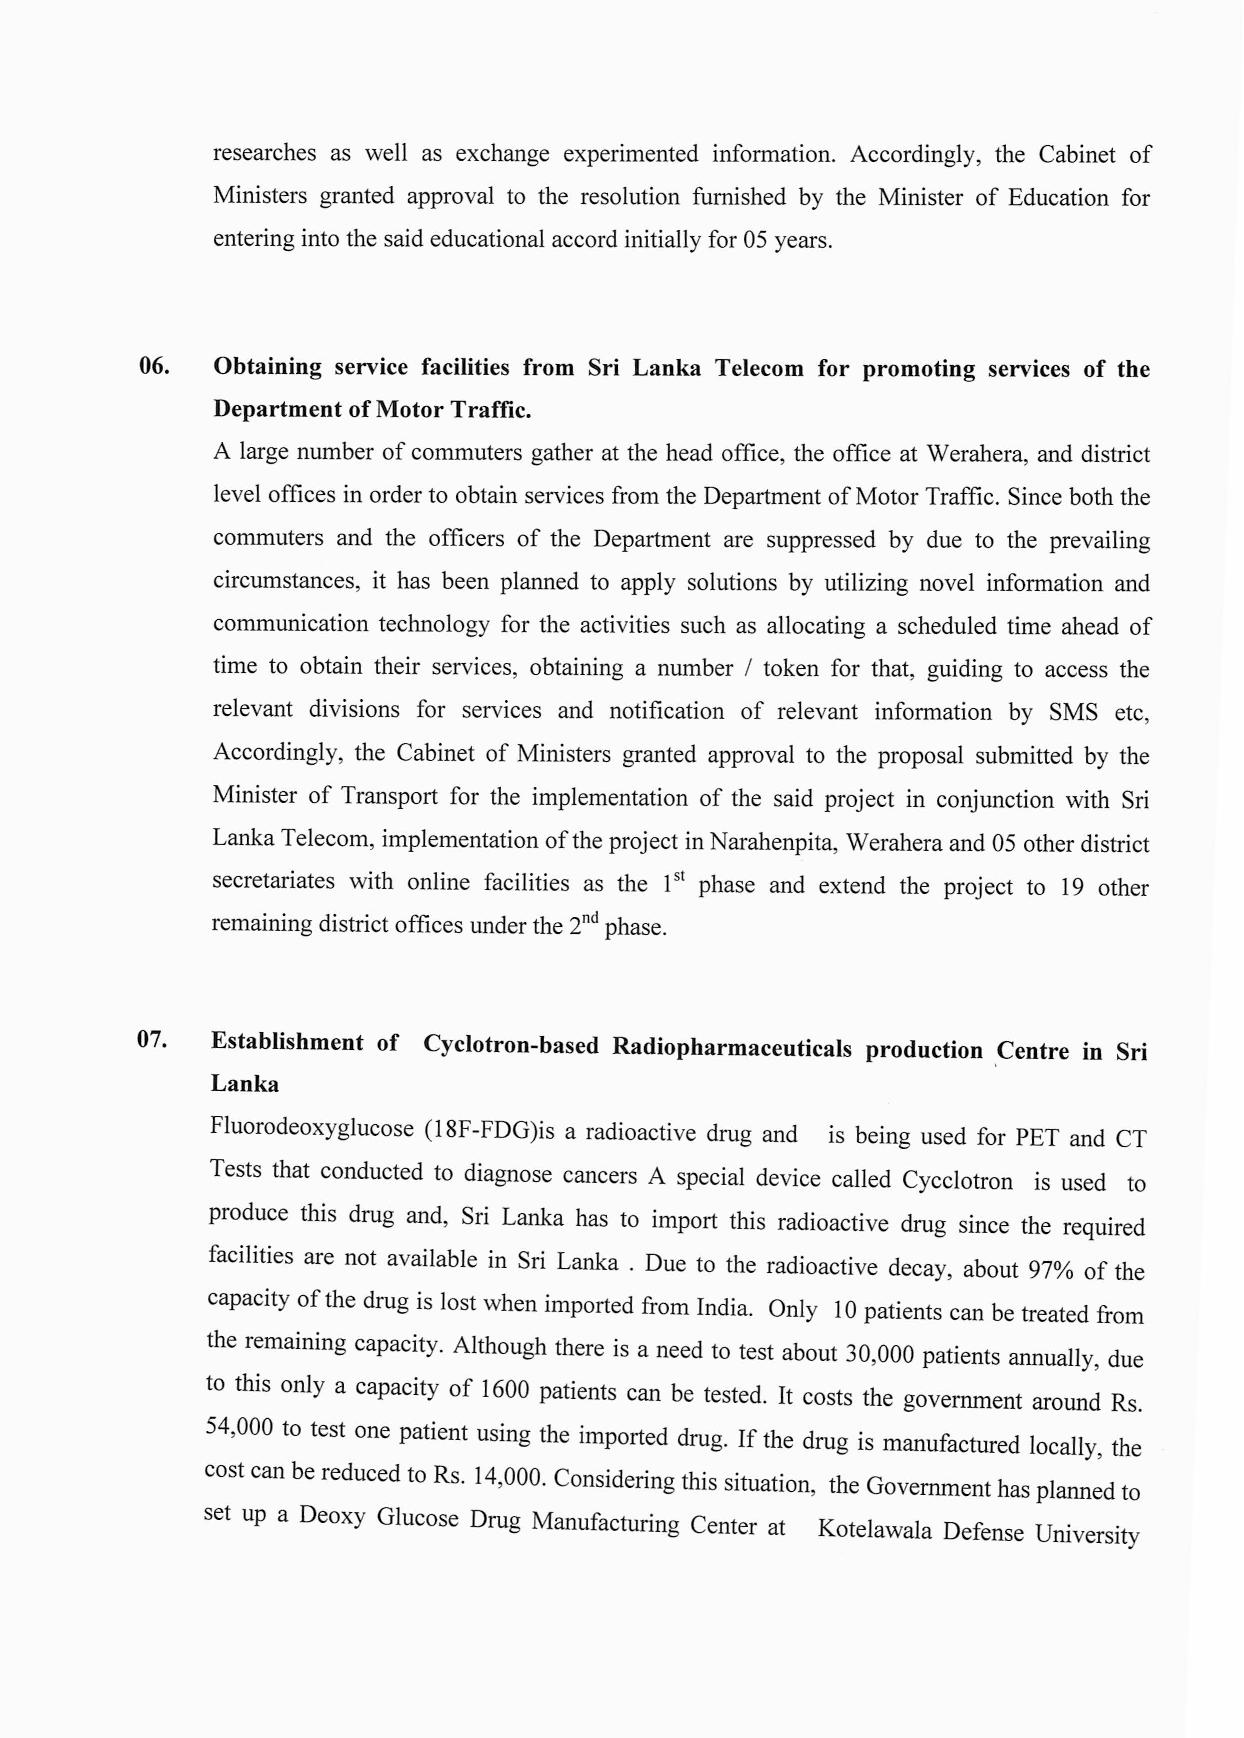 Cabinet Desision on 29.03.2021 English page 003